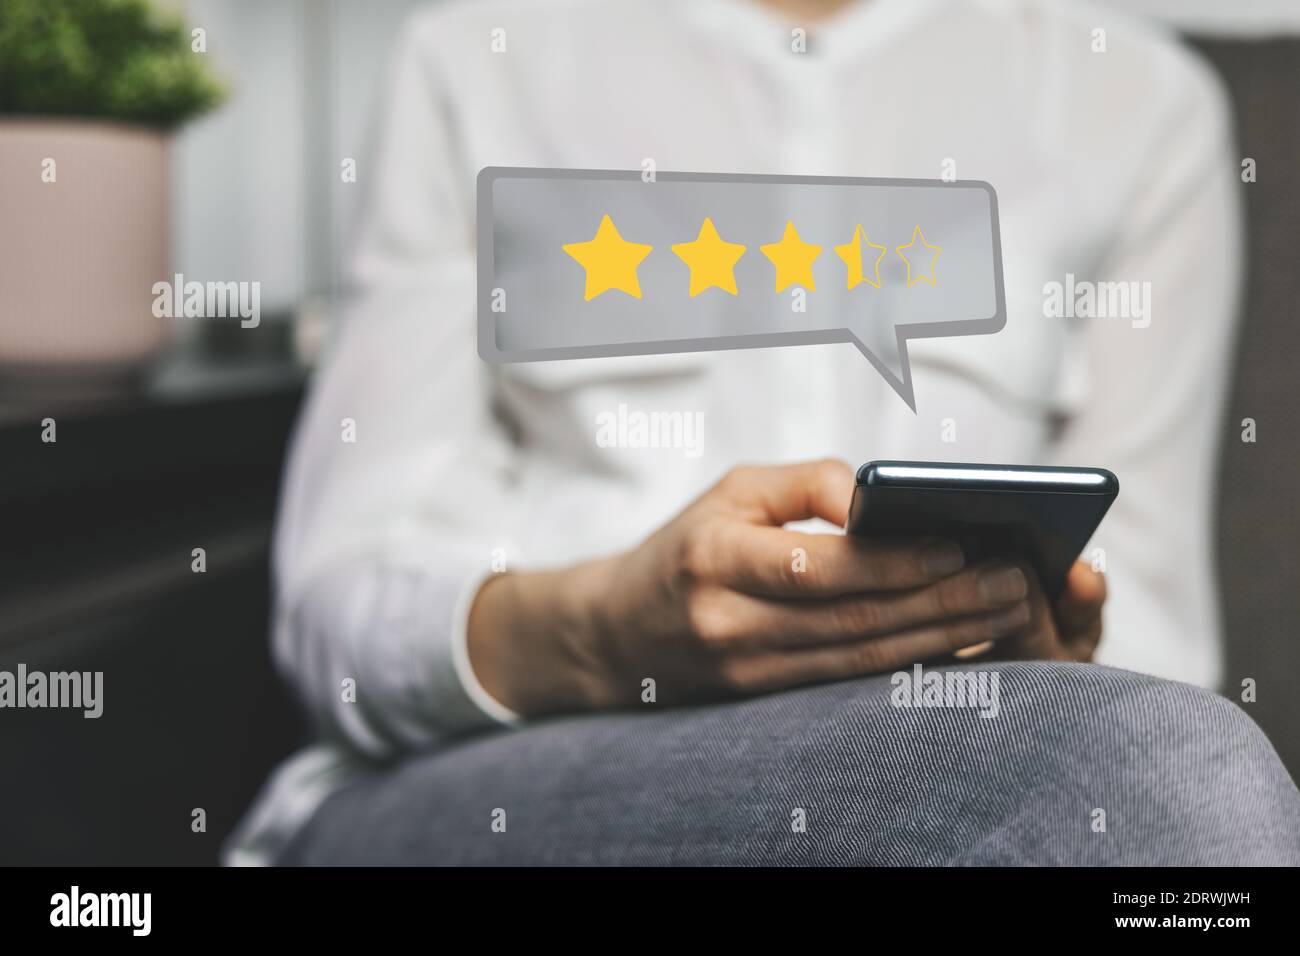 customer review - woman using phone to give feedback and rate her experience with stars about service or product quality Stock Photo